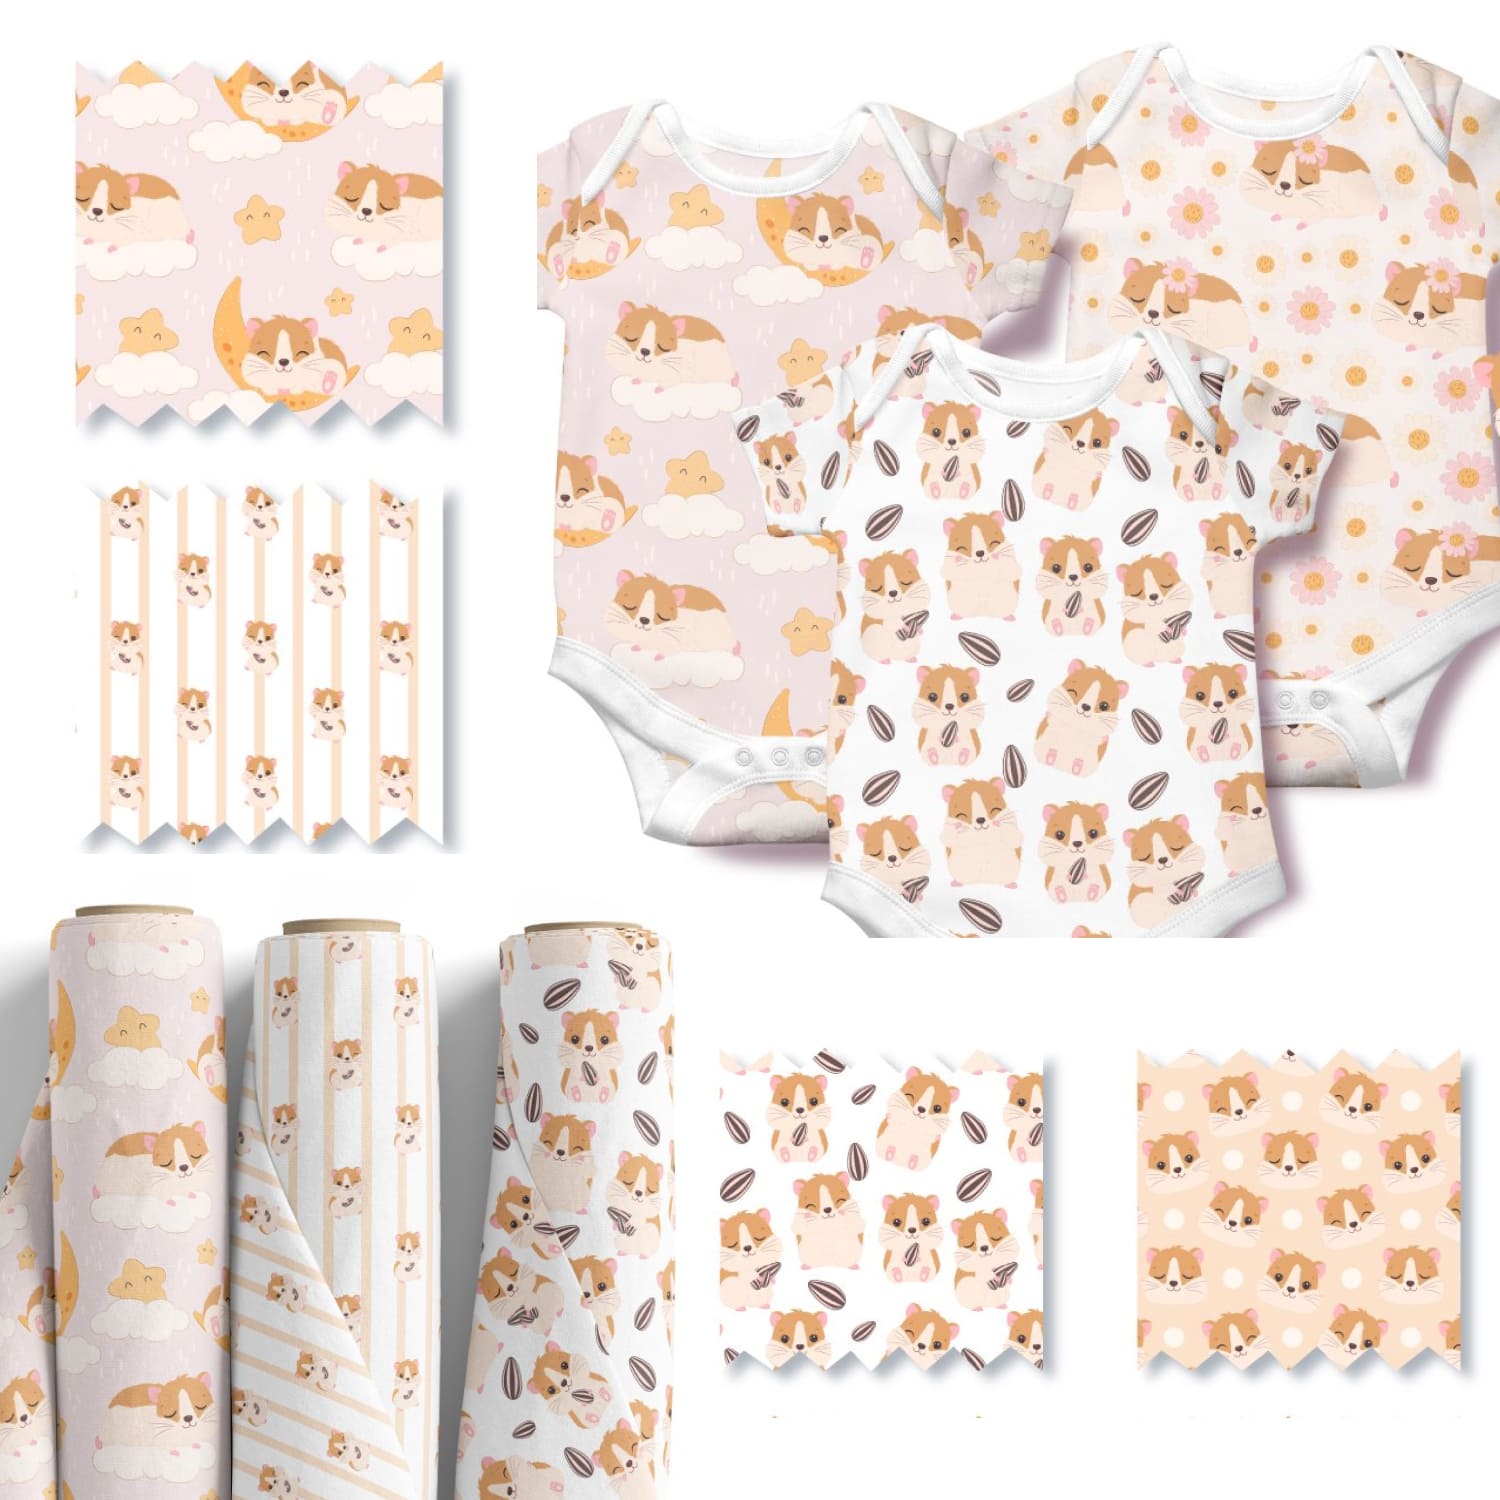 Preview little hamster seamless patterns.